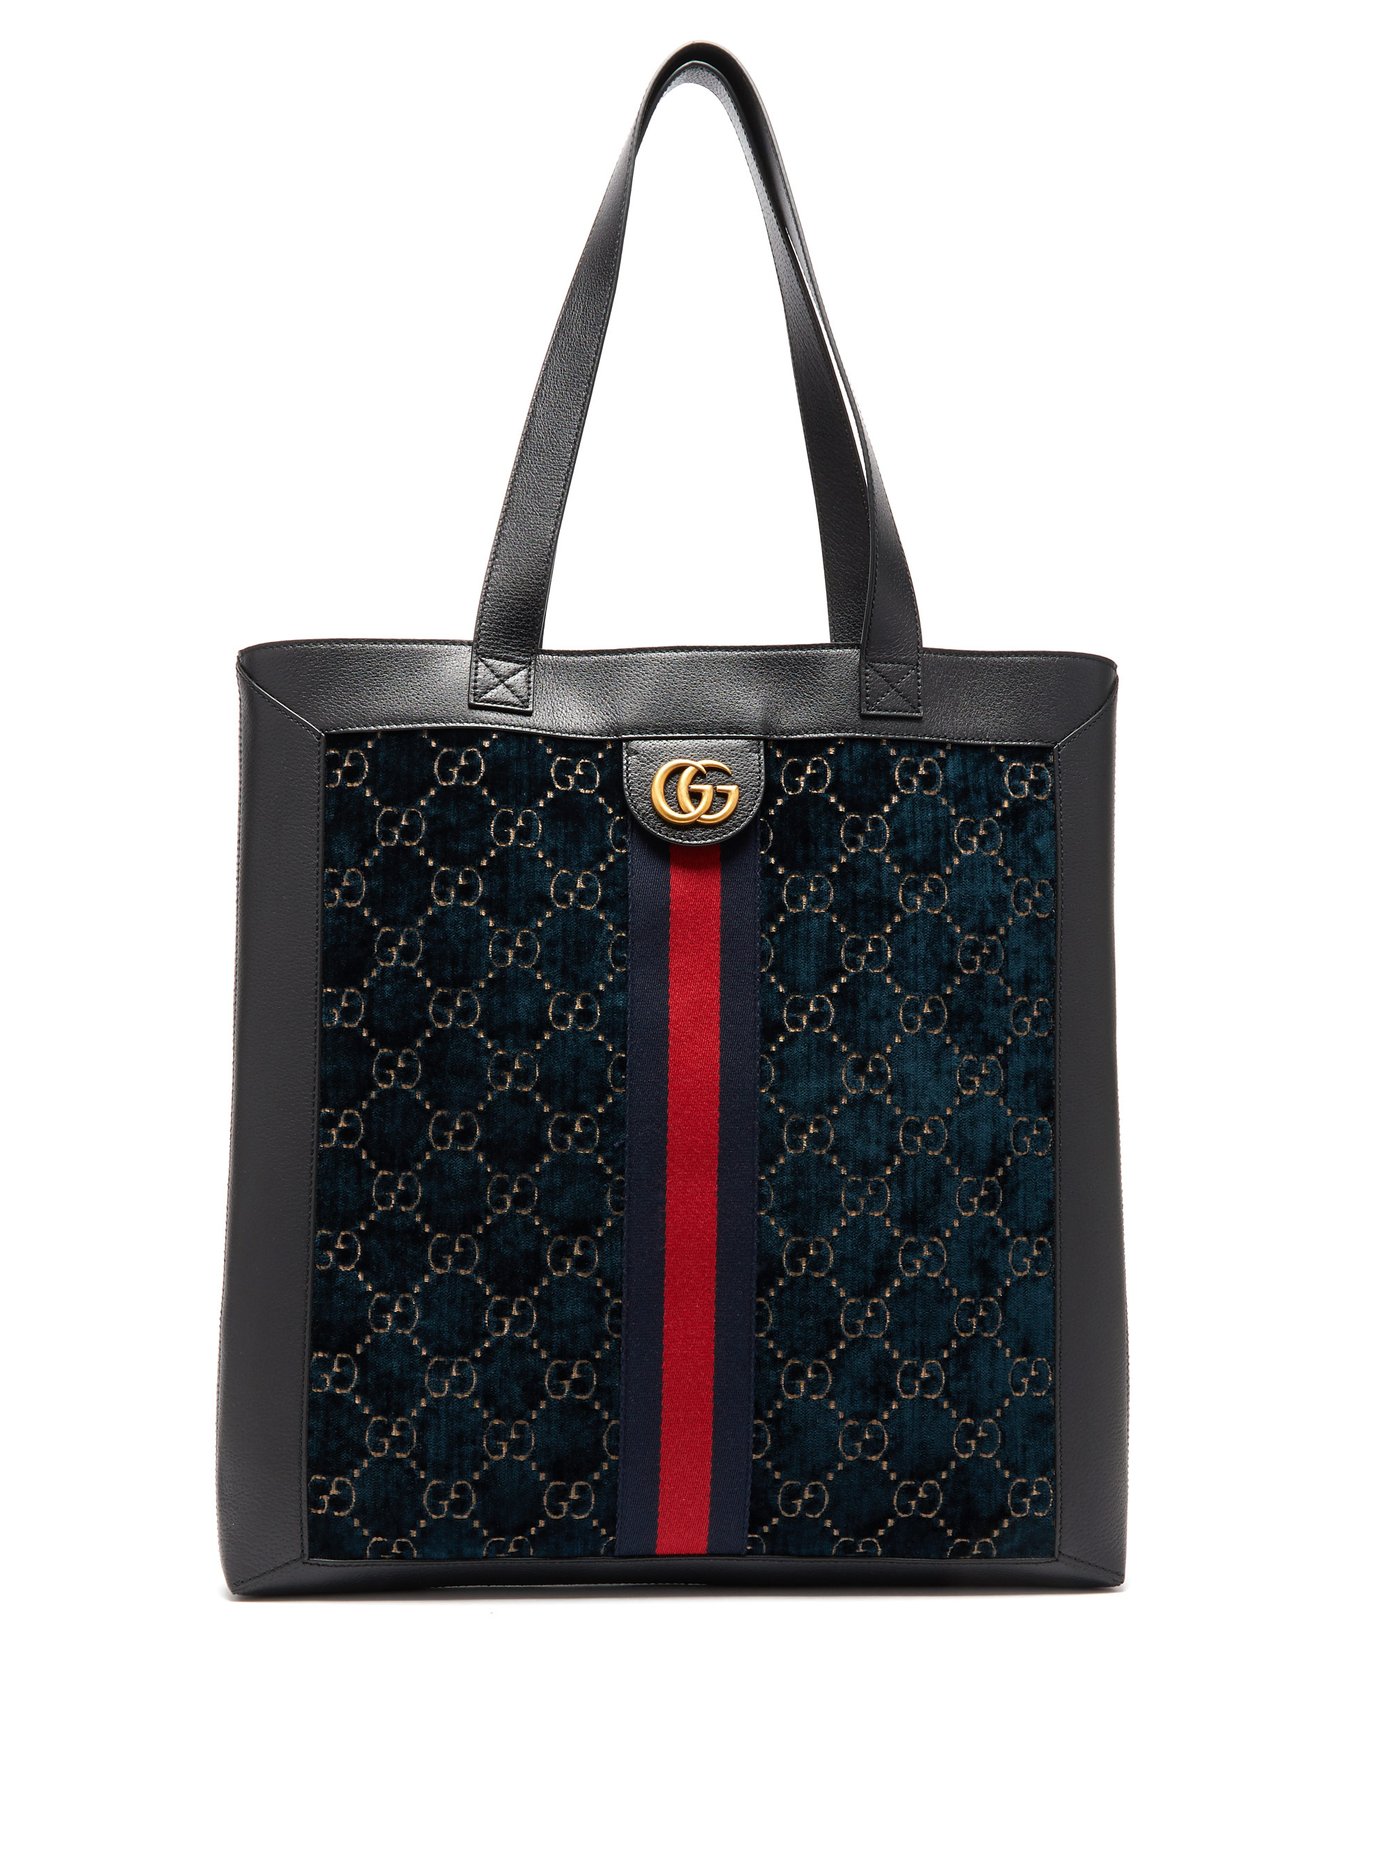 GG velvet and leather tote bag | Gucci 